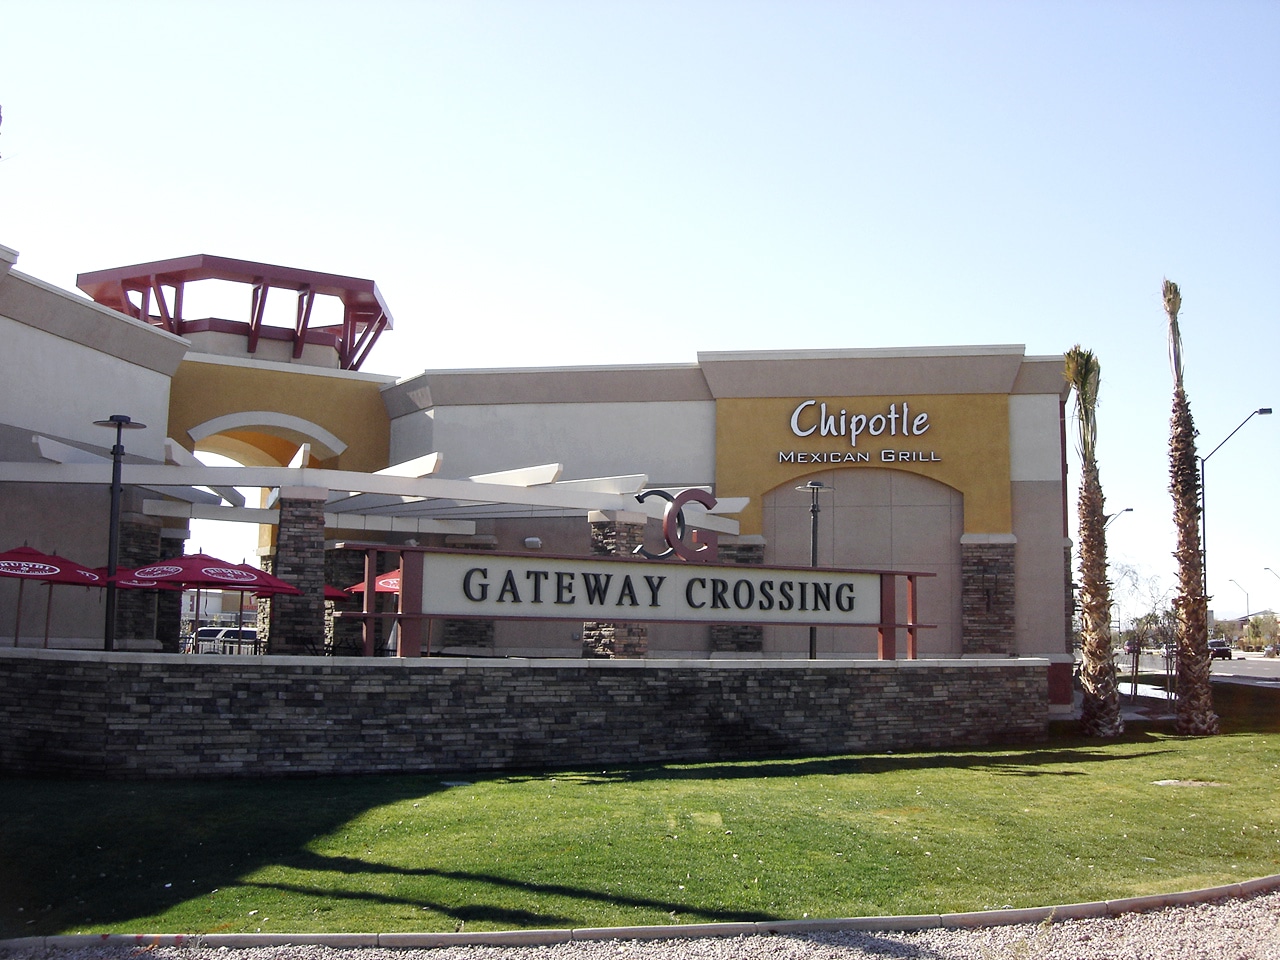 A building with a sign that says gateway crossing.